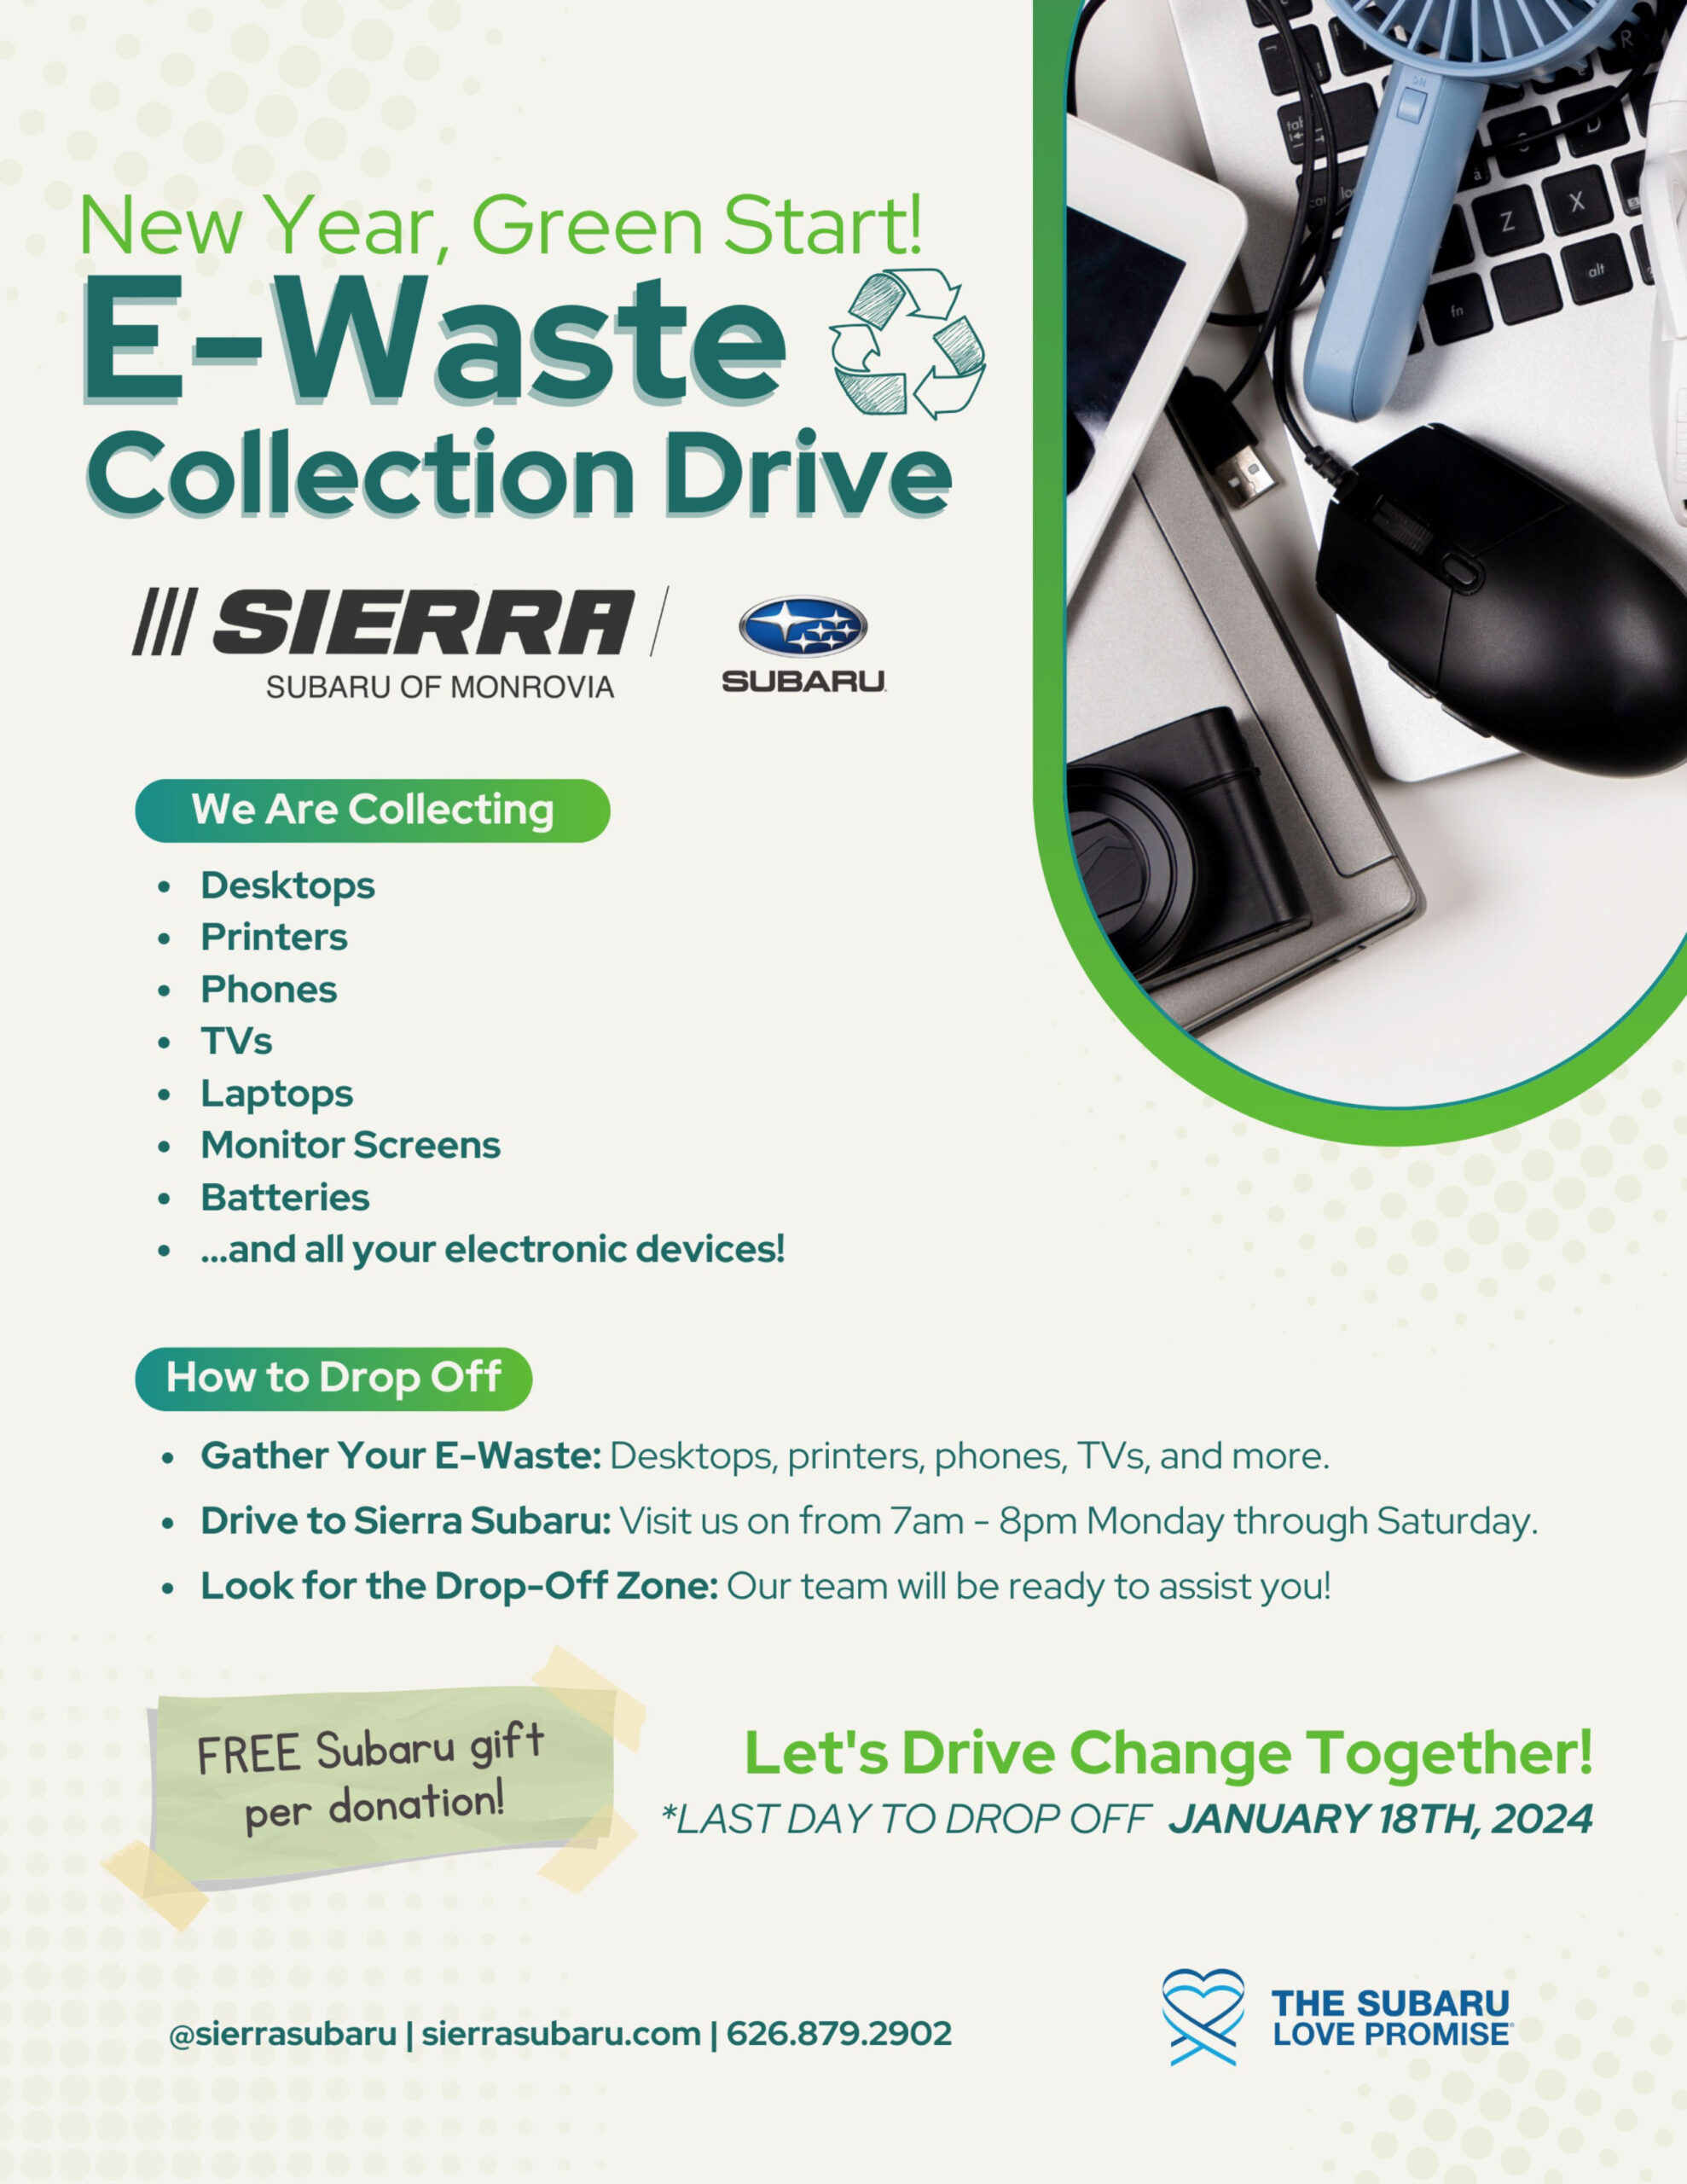 Sierra Auto e-Waste Collection Drive for January 2024